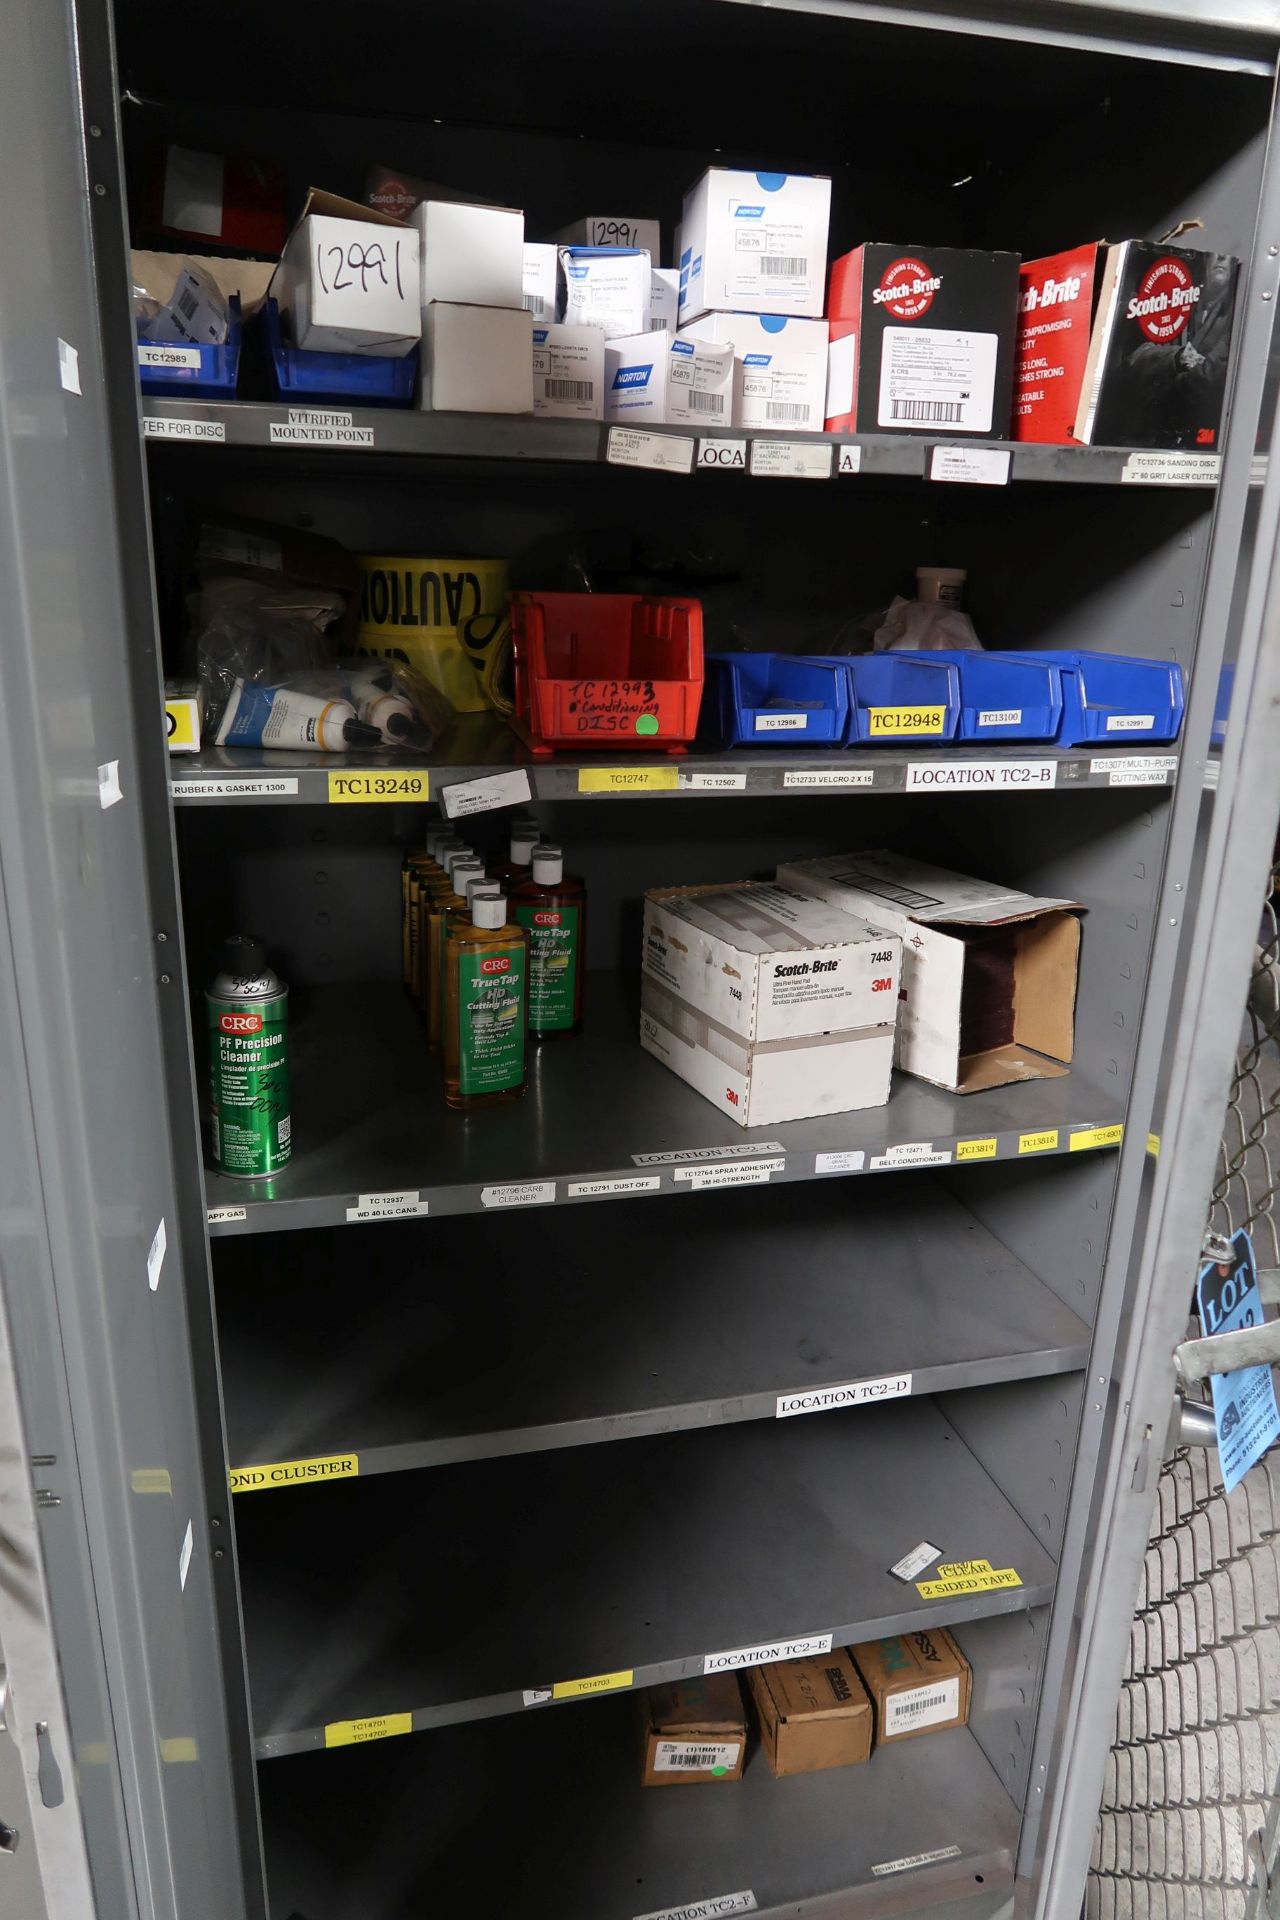 STORAGE CABINET WITH MAINTENANCE ITEMS **LOADING PRICE DUE TO ERRA - $75.00** - Image 2 of 4